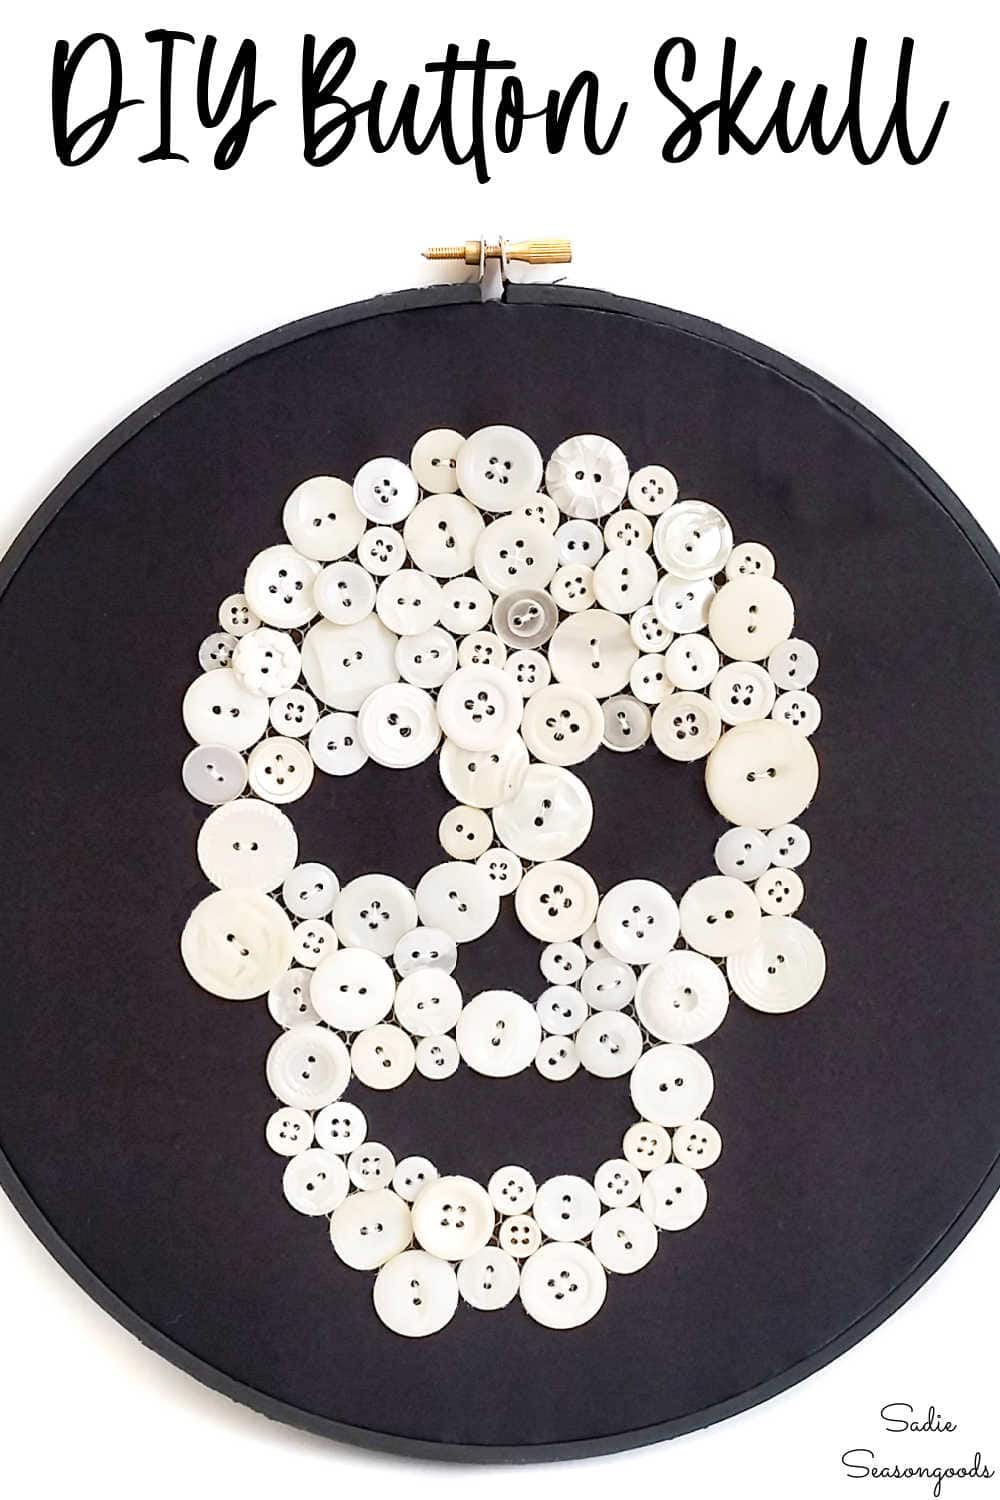 how to make skull art with vintage buttons